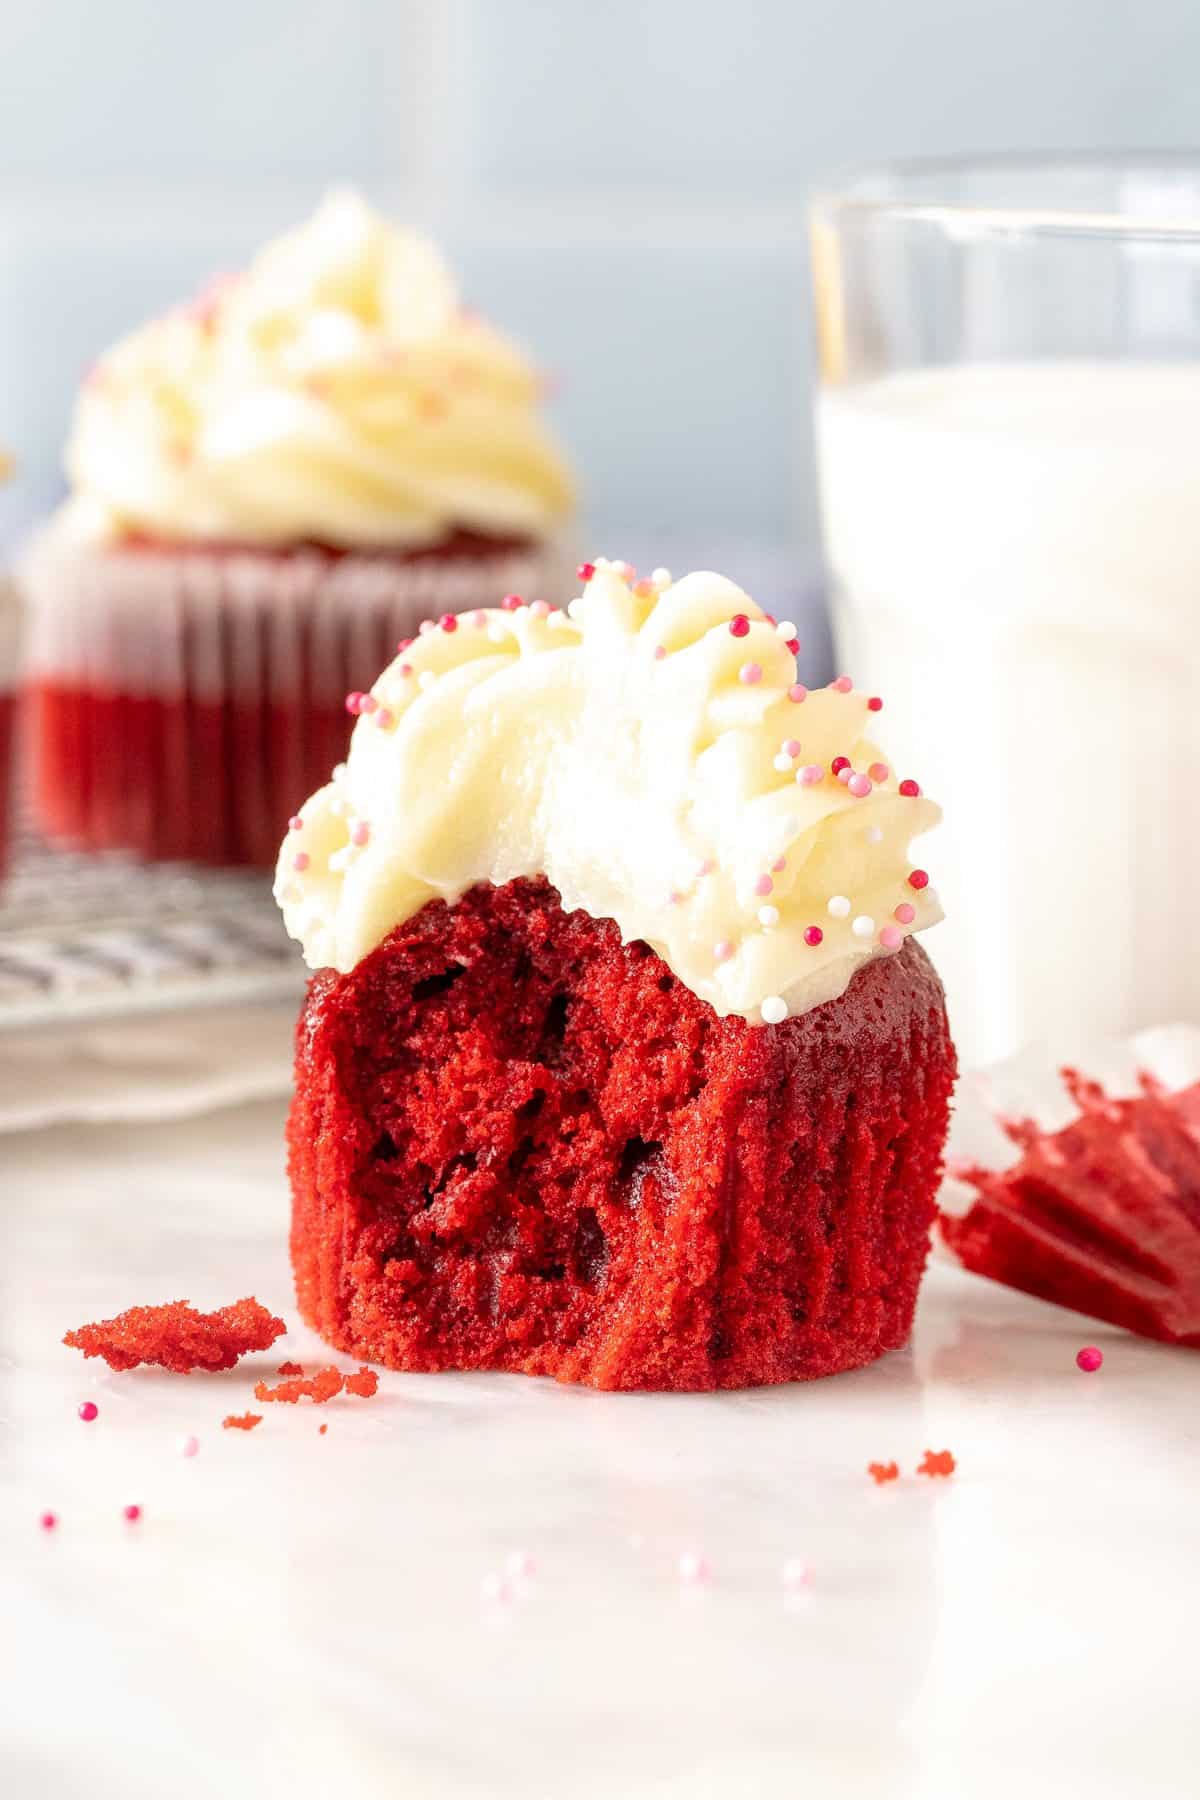 Red velvet cupcake with cream cheese frosting with bite taken out